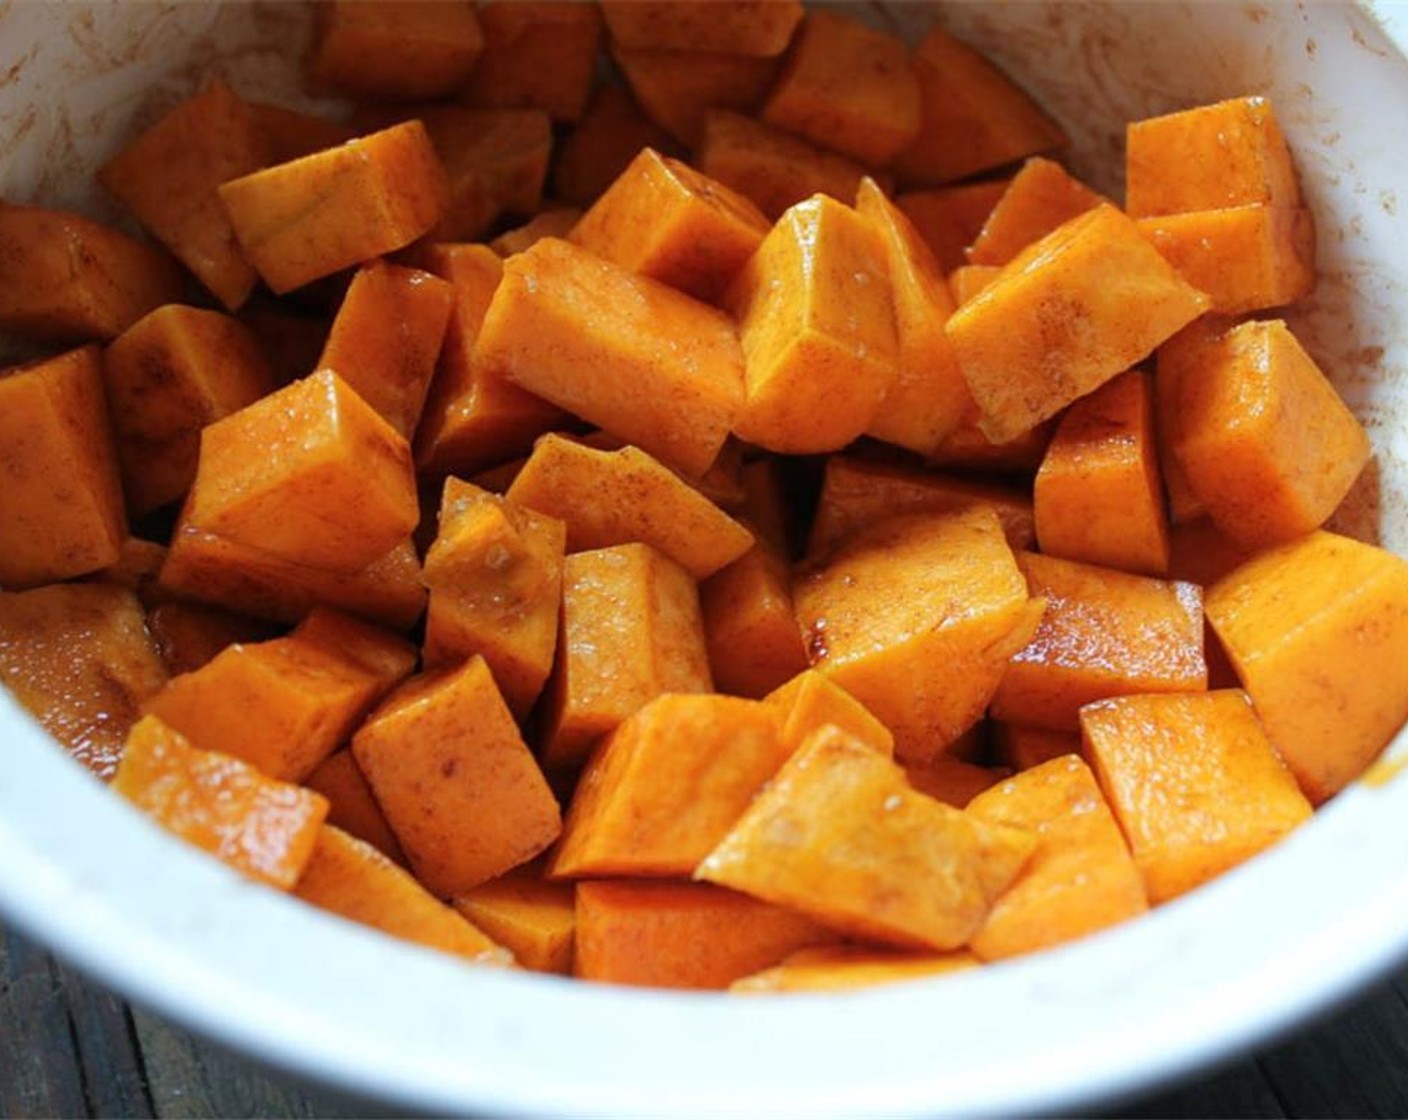 step 7 Line a baking sheet with parchment or tinfoil and spray it with cooking spray. Briefly set aside. Place the cubed butternut squash in a medium bowl. Add 1 tablespoon of Olive Oil (1 Tbsp) and the Ground Cinnamon (1/2 tsp) and toss to coat.